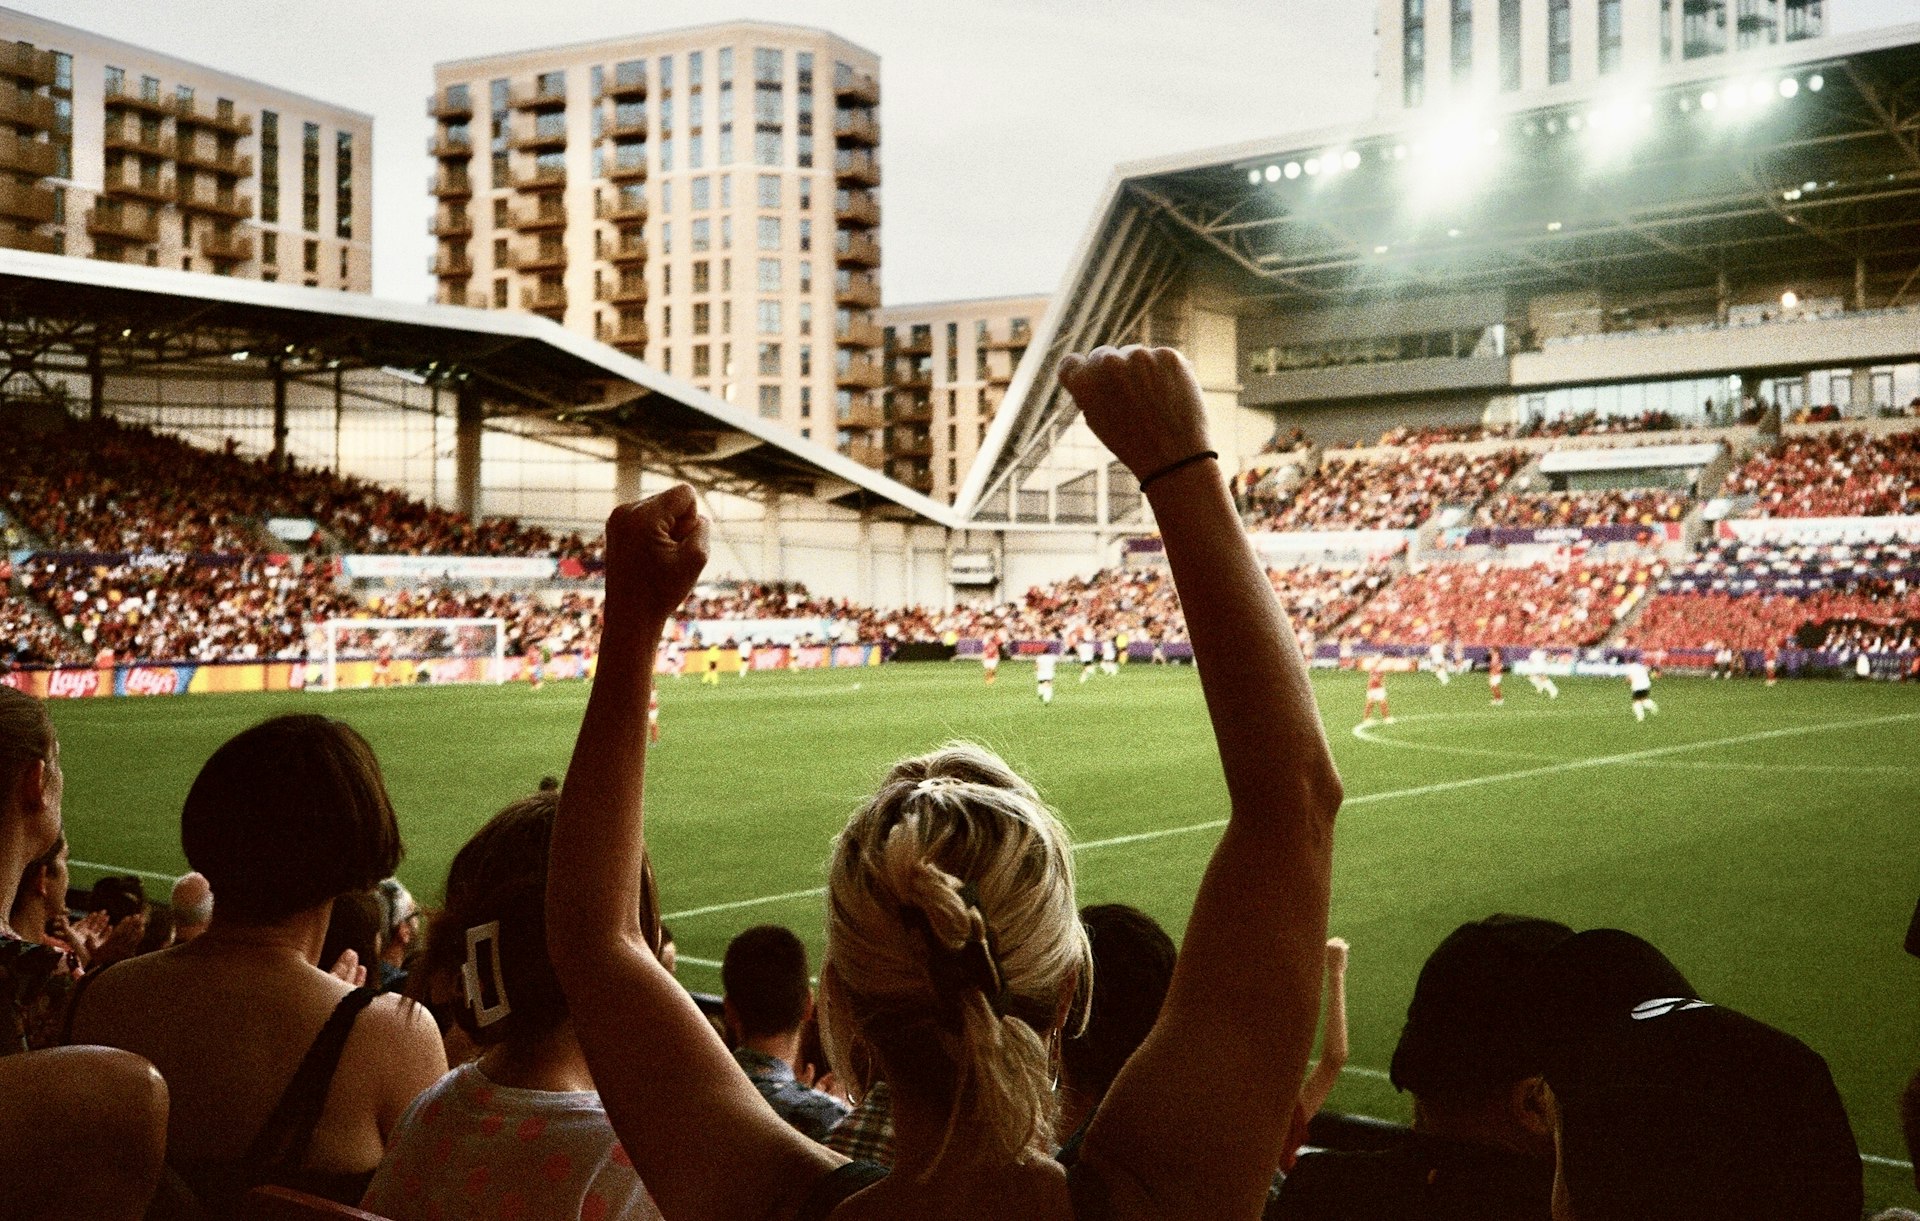 The resurgence of film photography in women's football